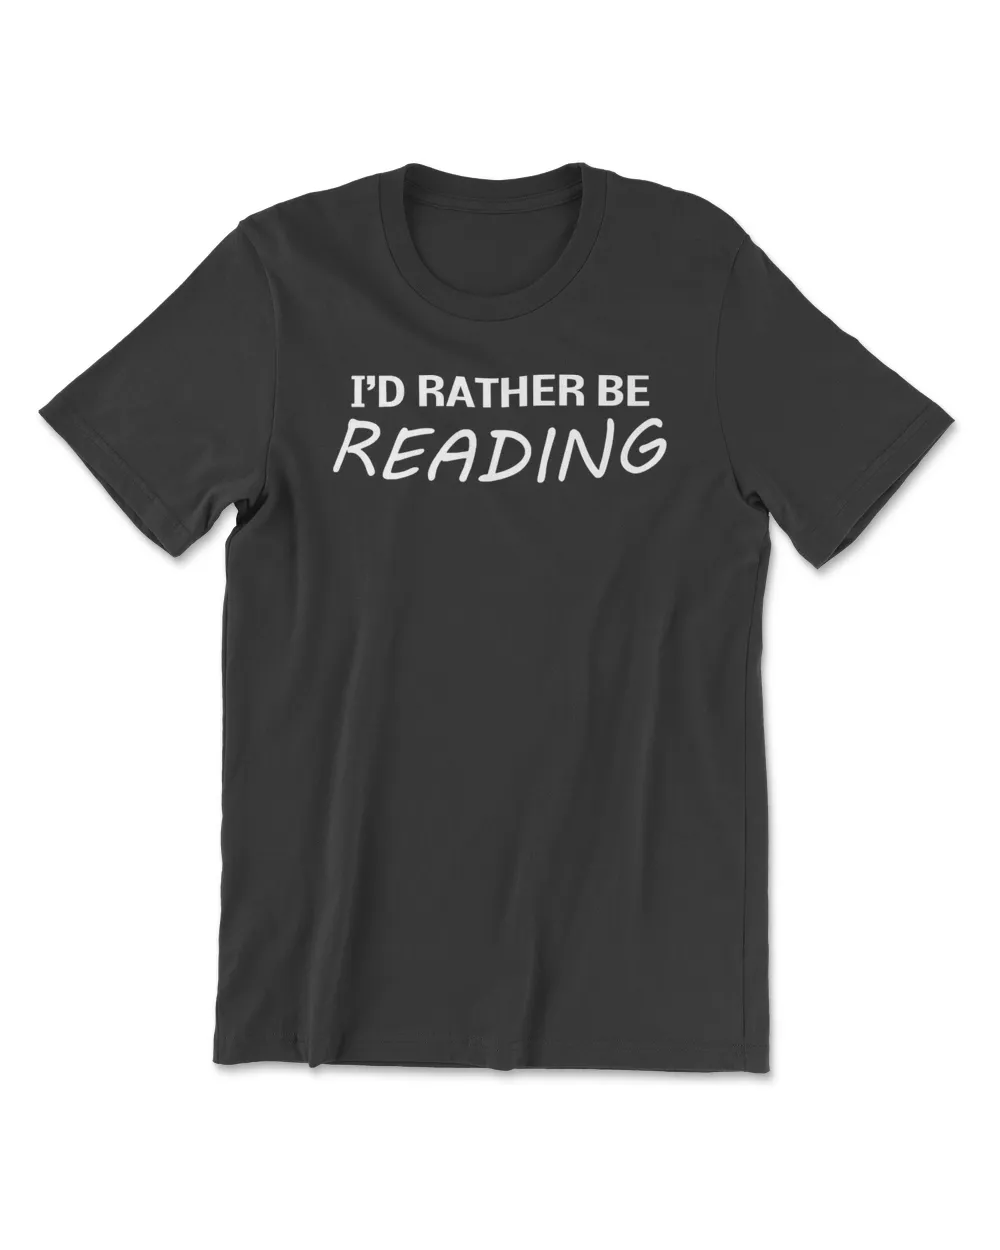 I'd Rather Be Reading - Funny Book Lover T Shirt